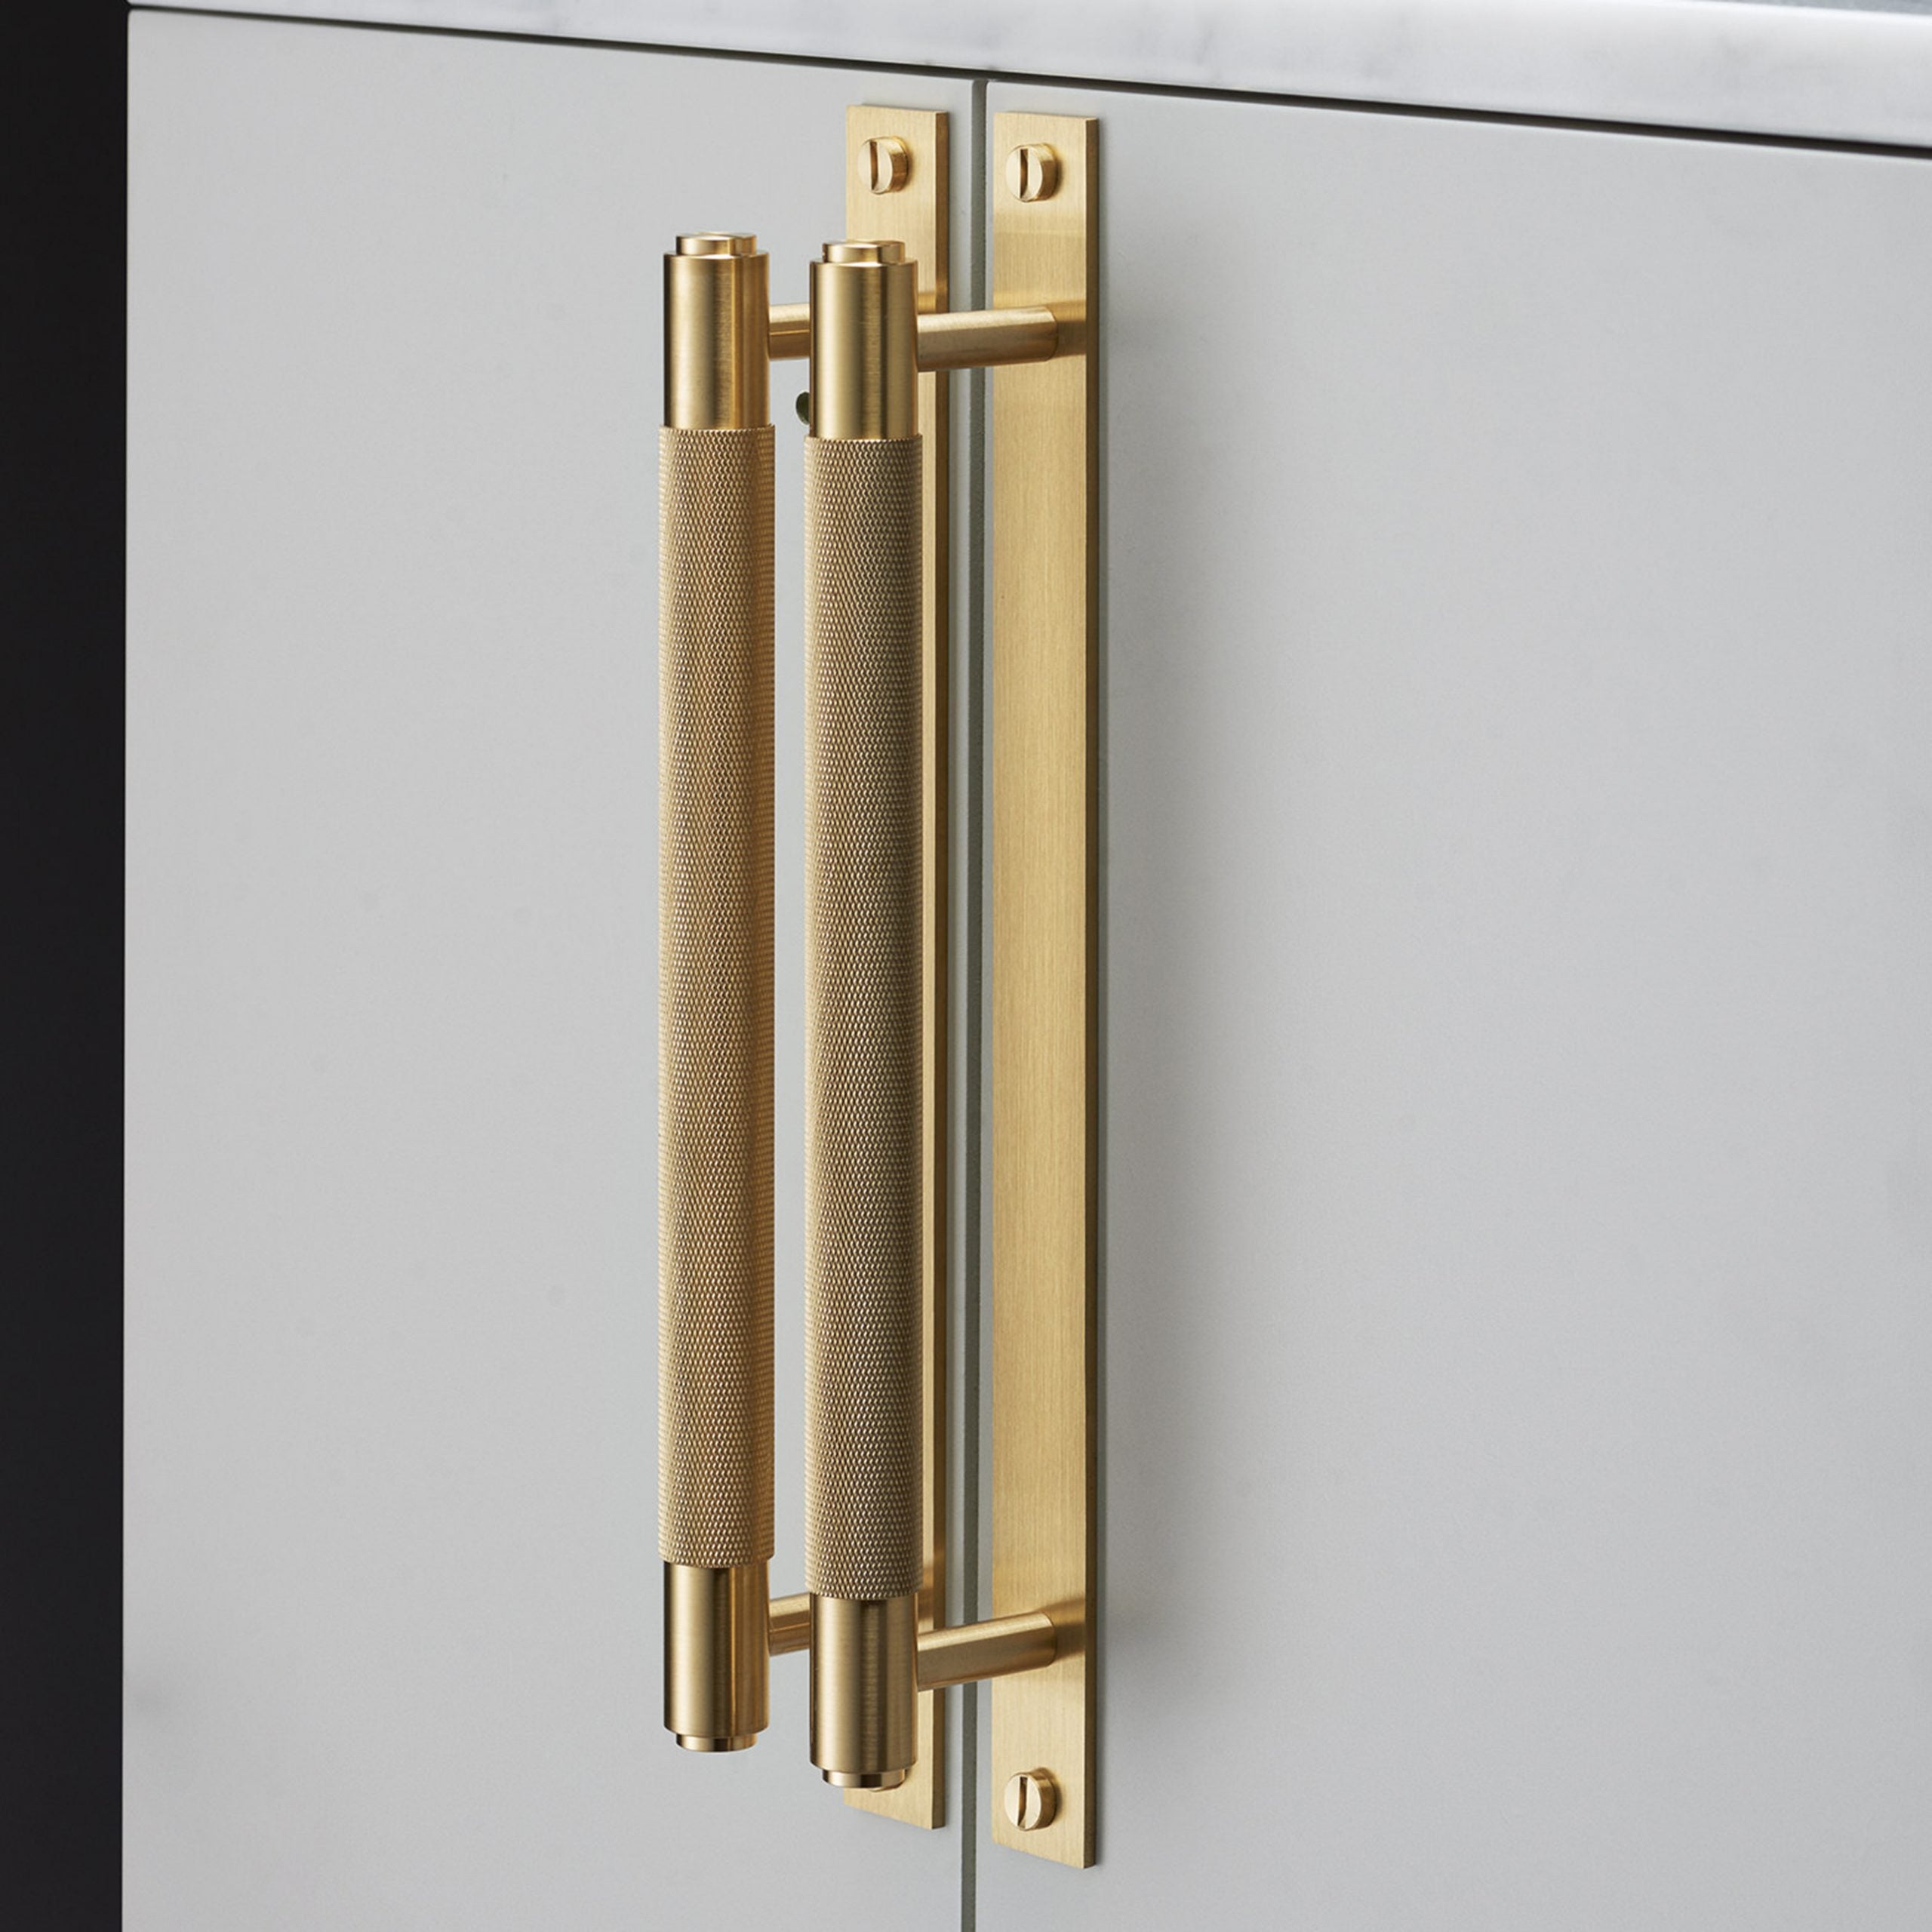 Buster + Punch Pull Bar, Linear Design Hardware Buster + Punch Brass 0.4x0.09x0.03 